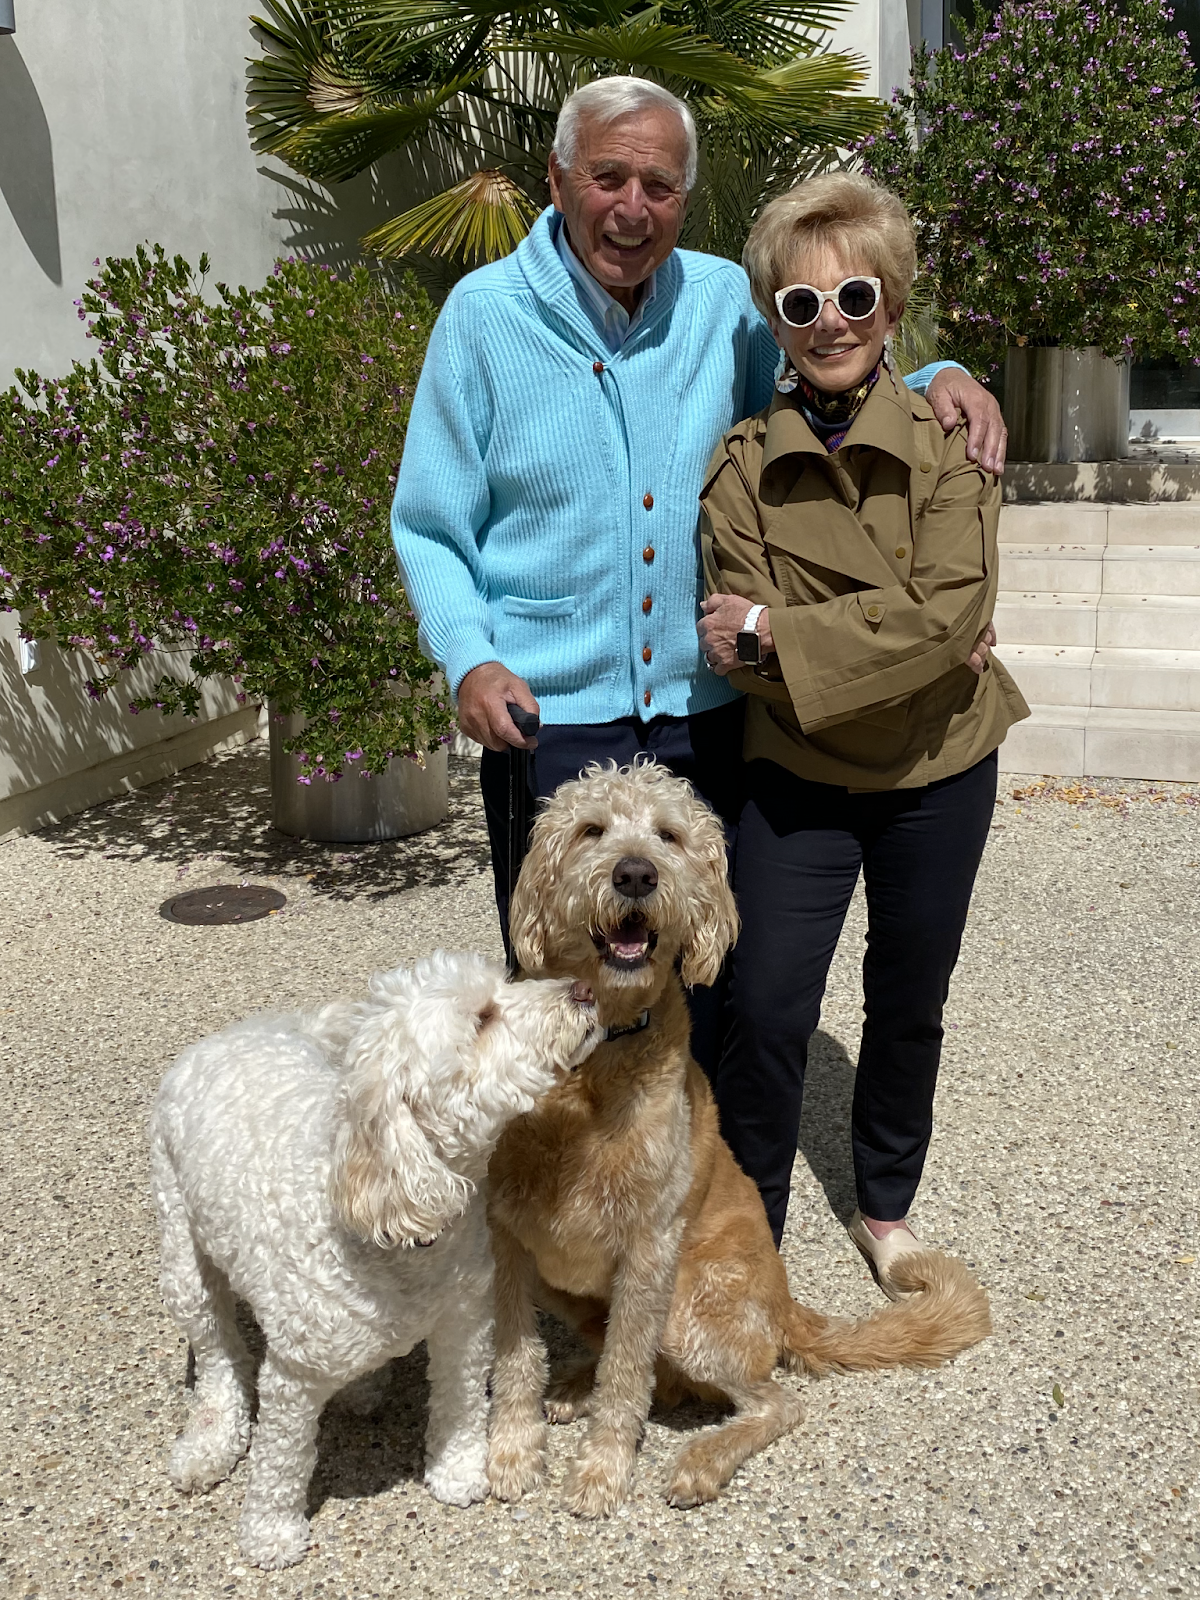 Demetrios and his wife smile for a photo with a white and golden pair of Labradoodles.